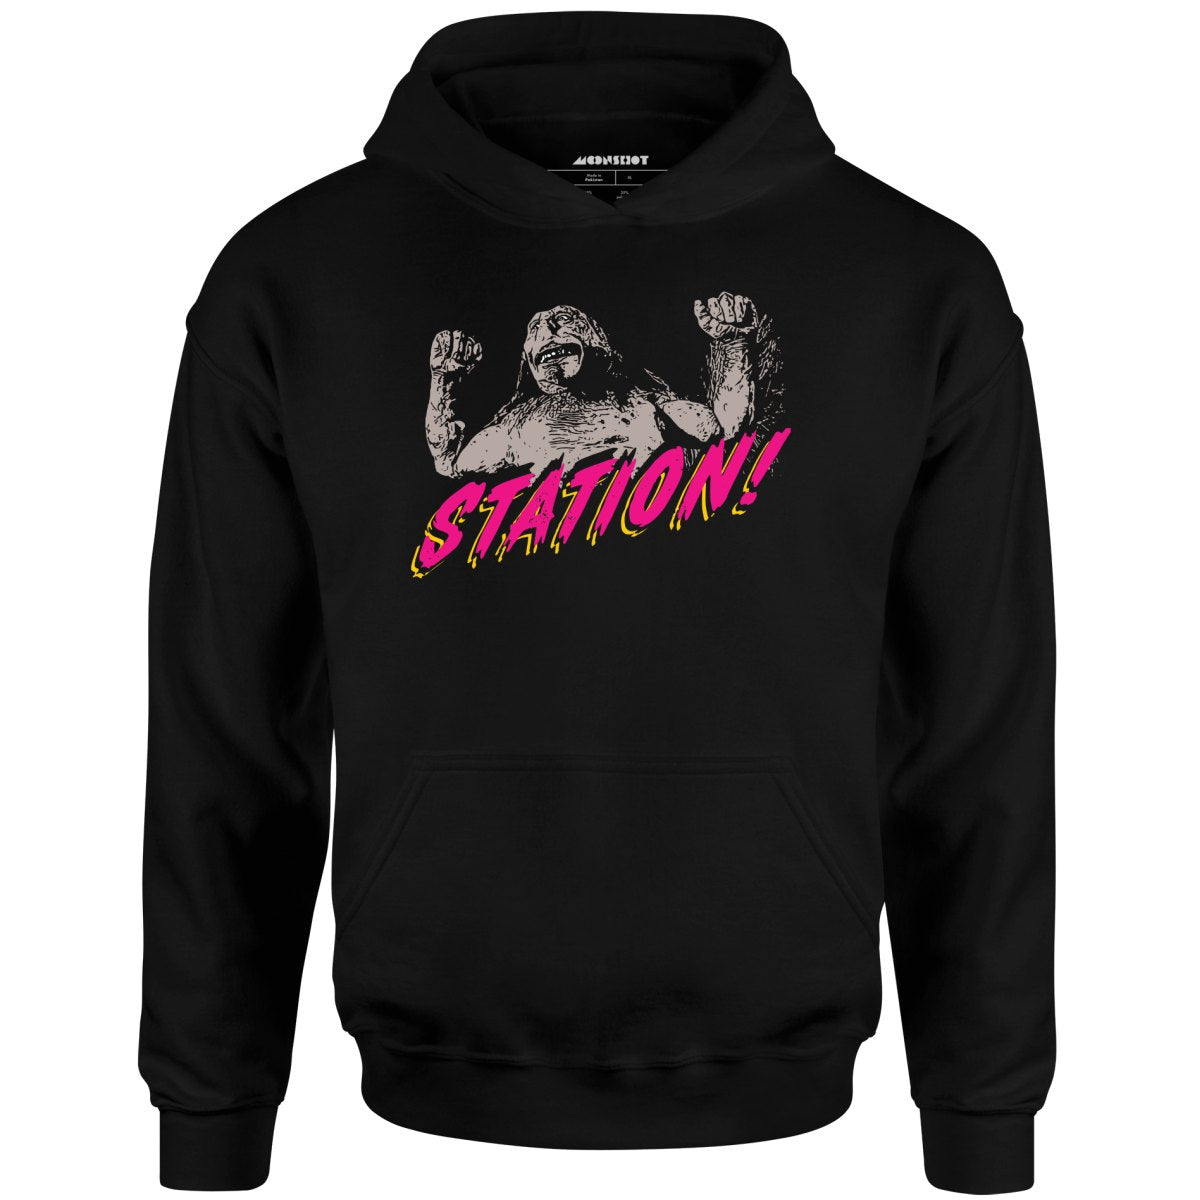 Station - Bill & Ted - Unisex Hoodie